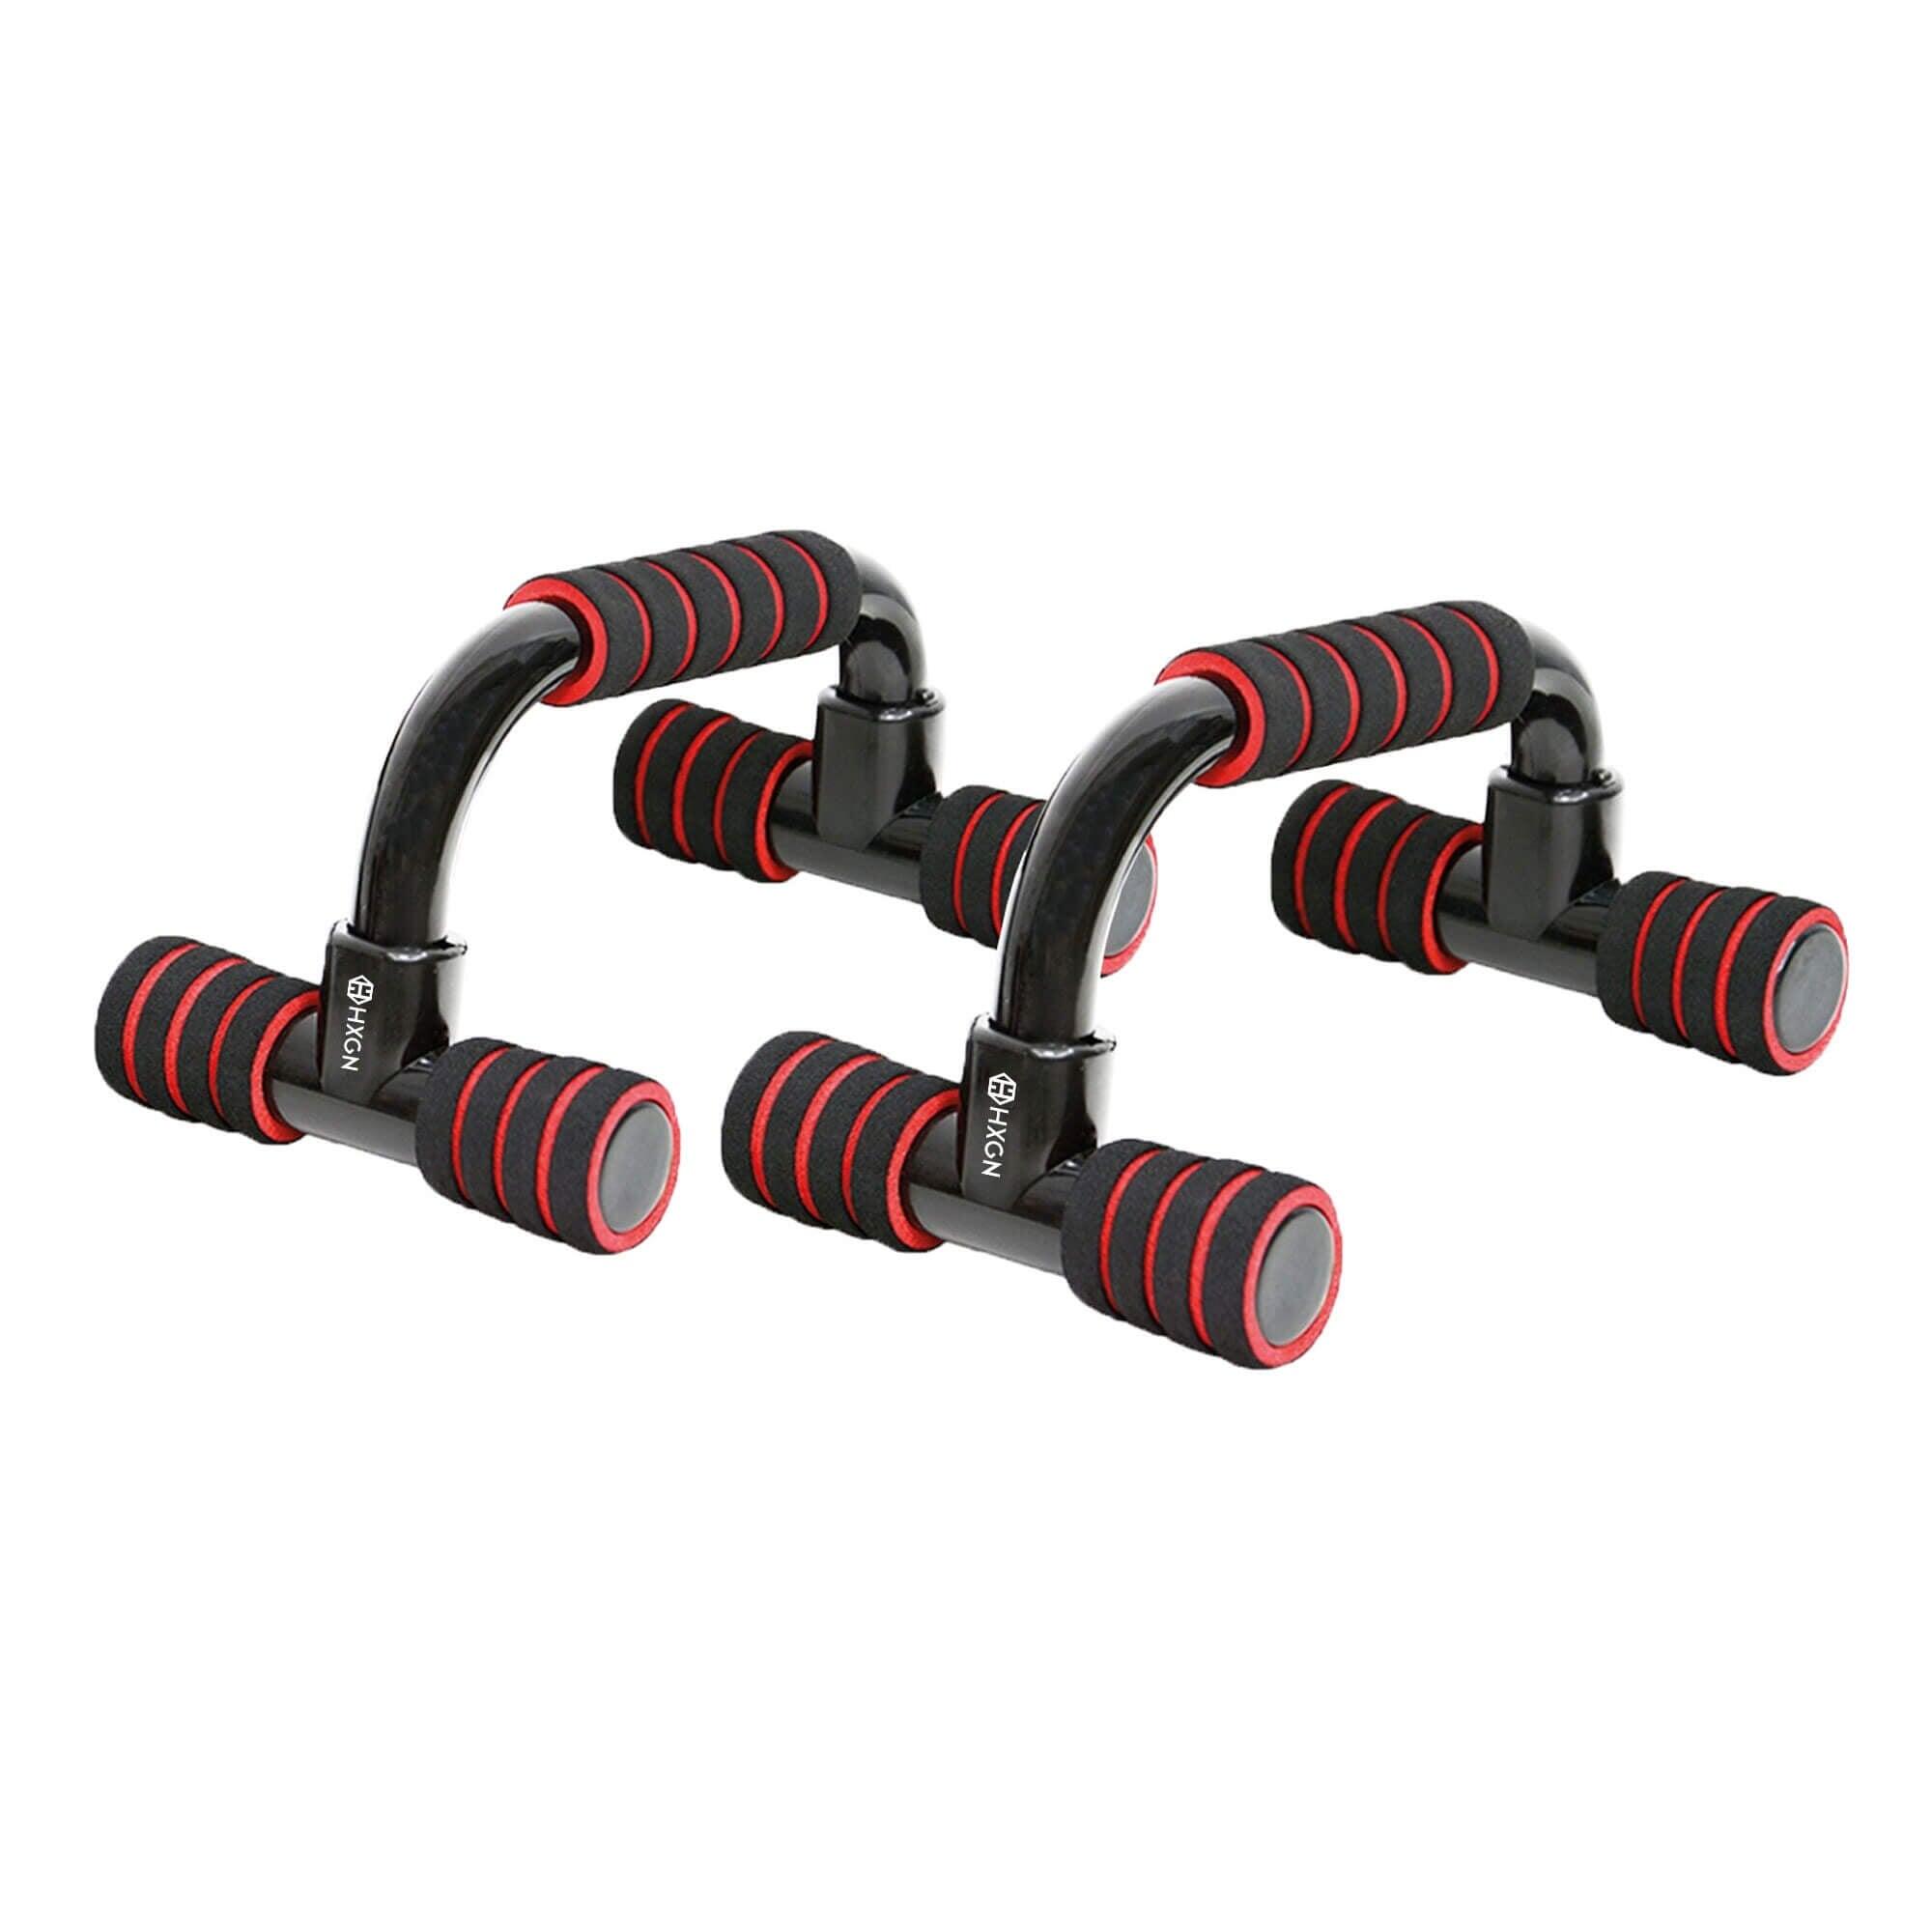 HXGN HXGN Angled Push Up Parallel Bars